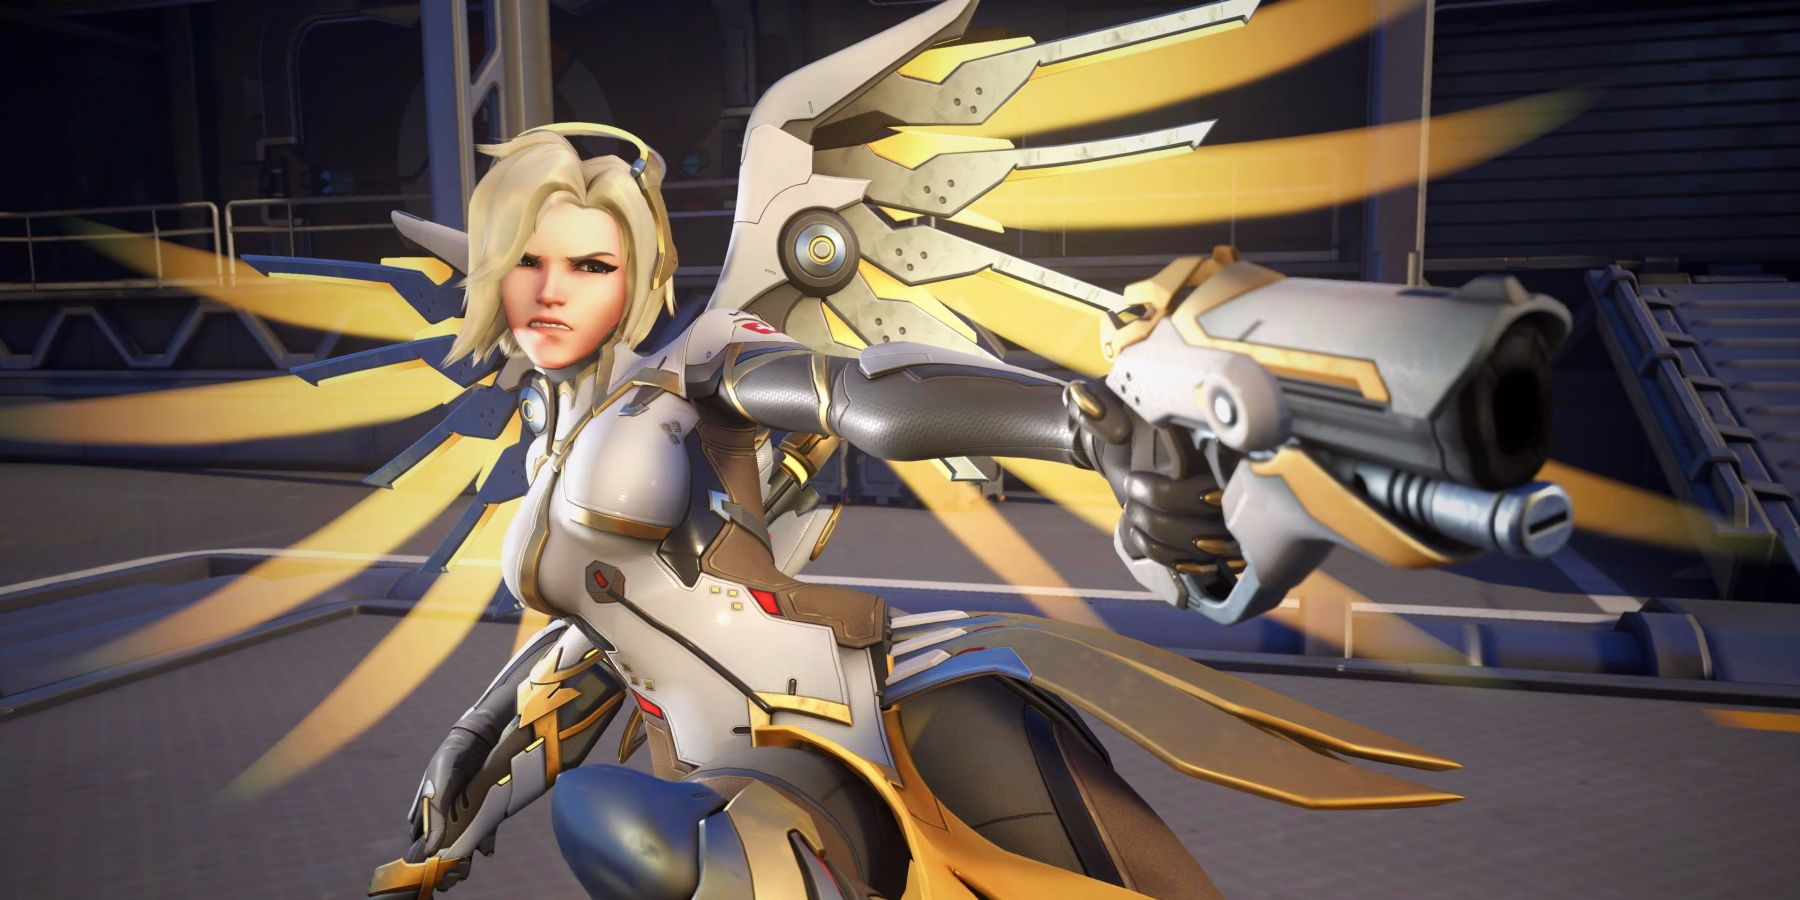 Mercy from Overwatch 2 holding the Caduceus Blaster